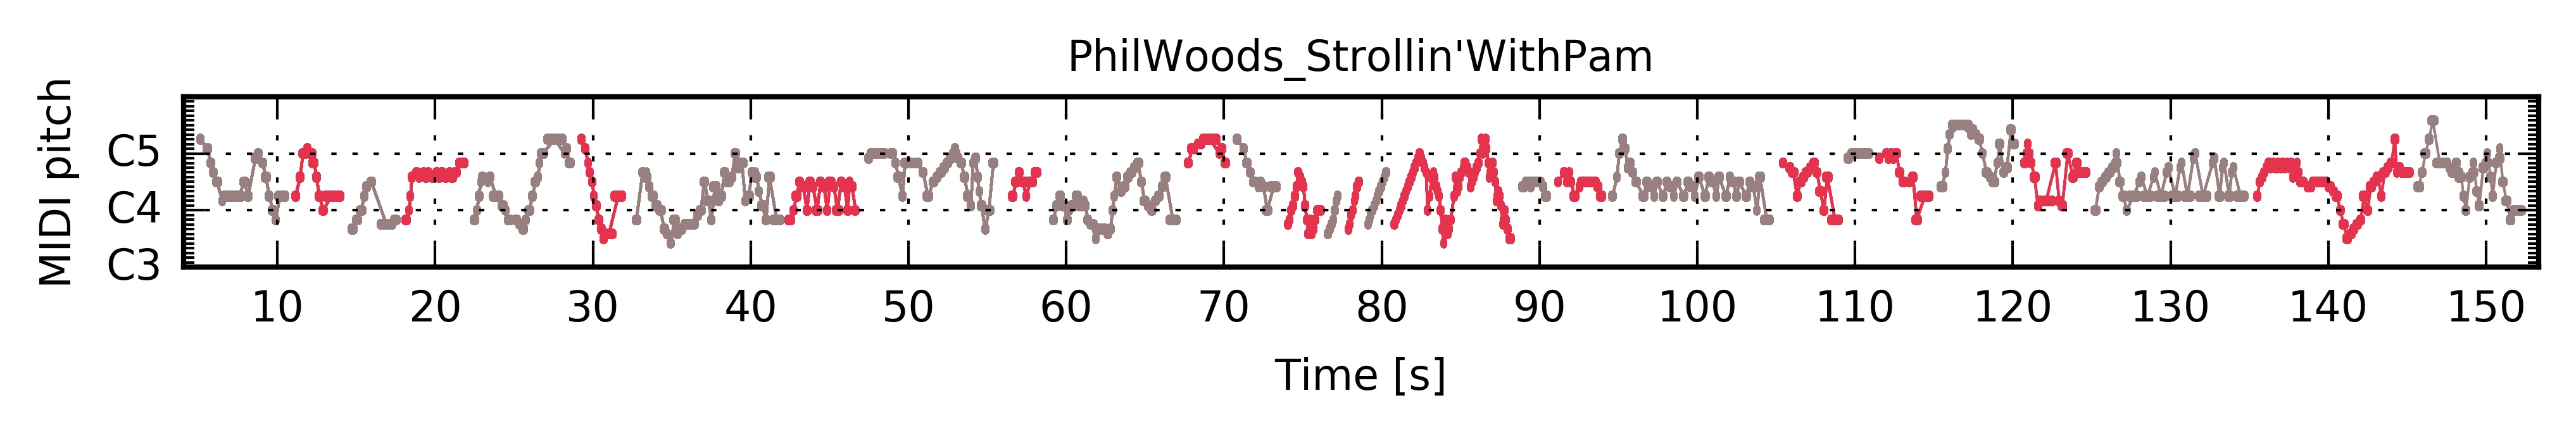 ../../_images/PianoRoll_PhilWoods_Strollin'WithPam.jpg